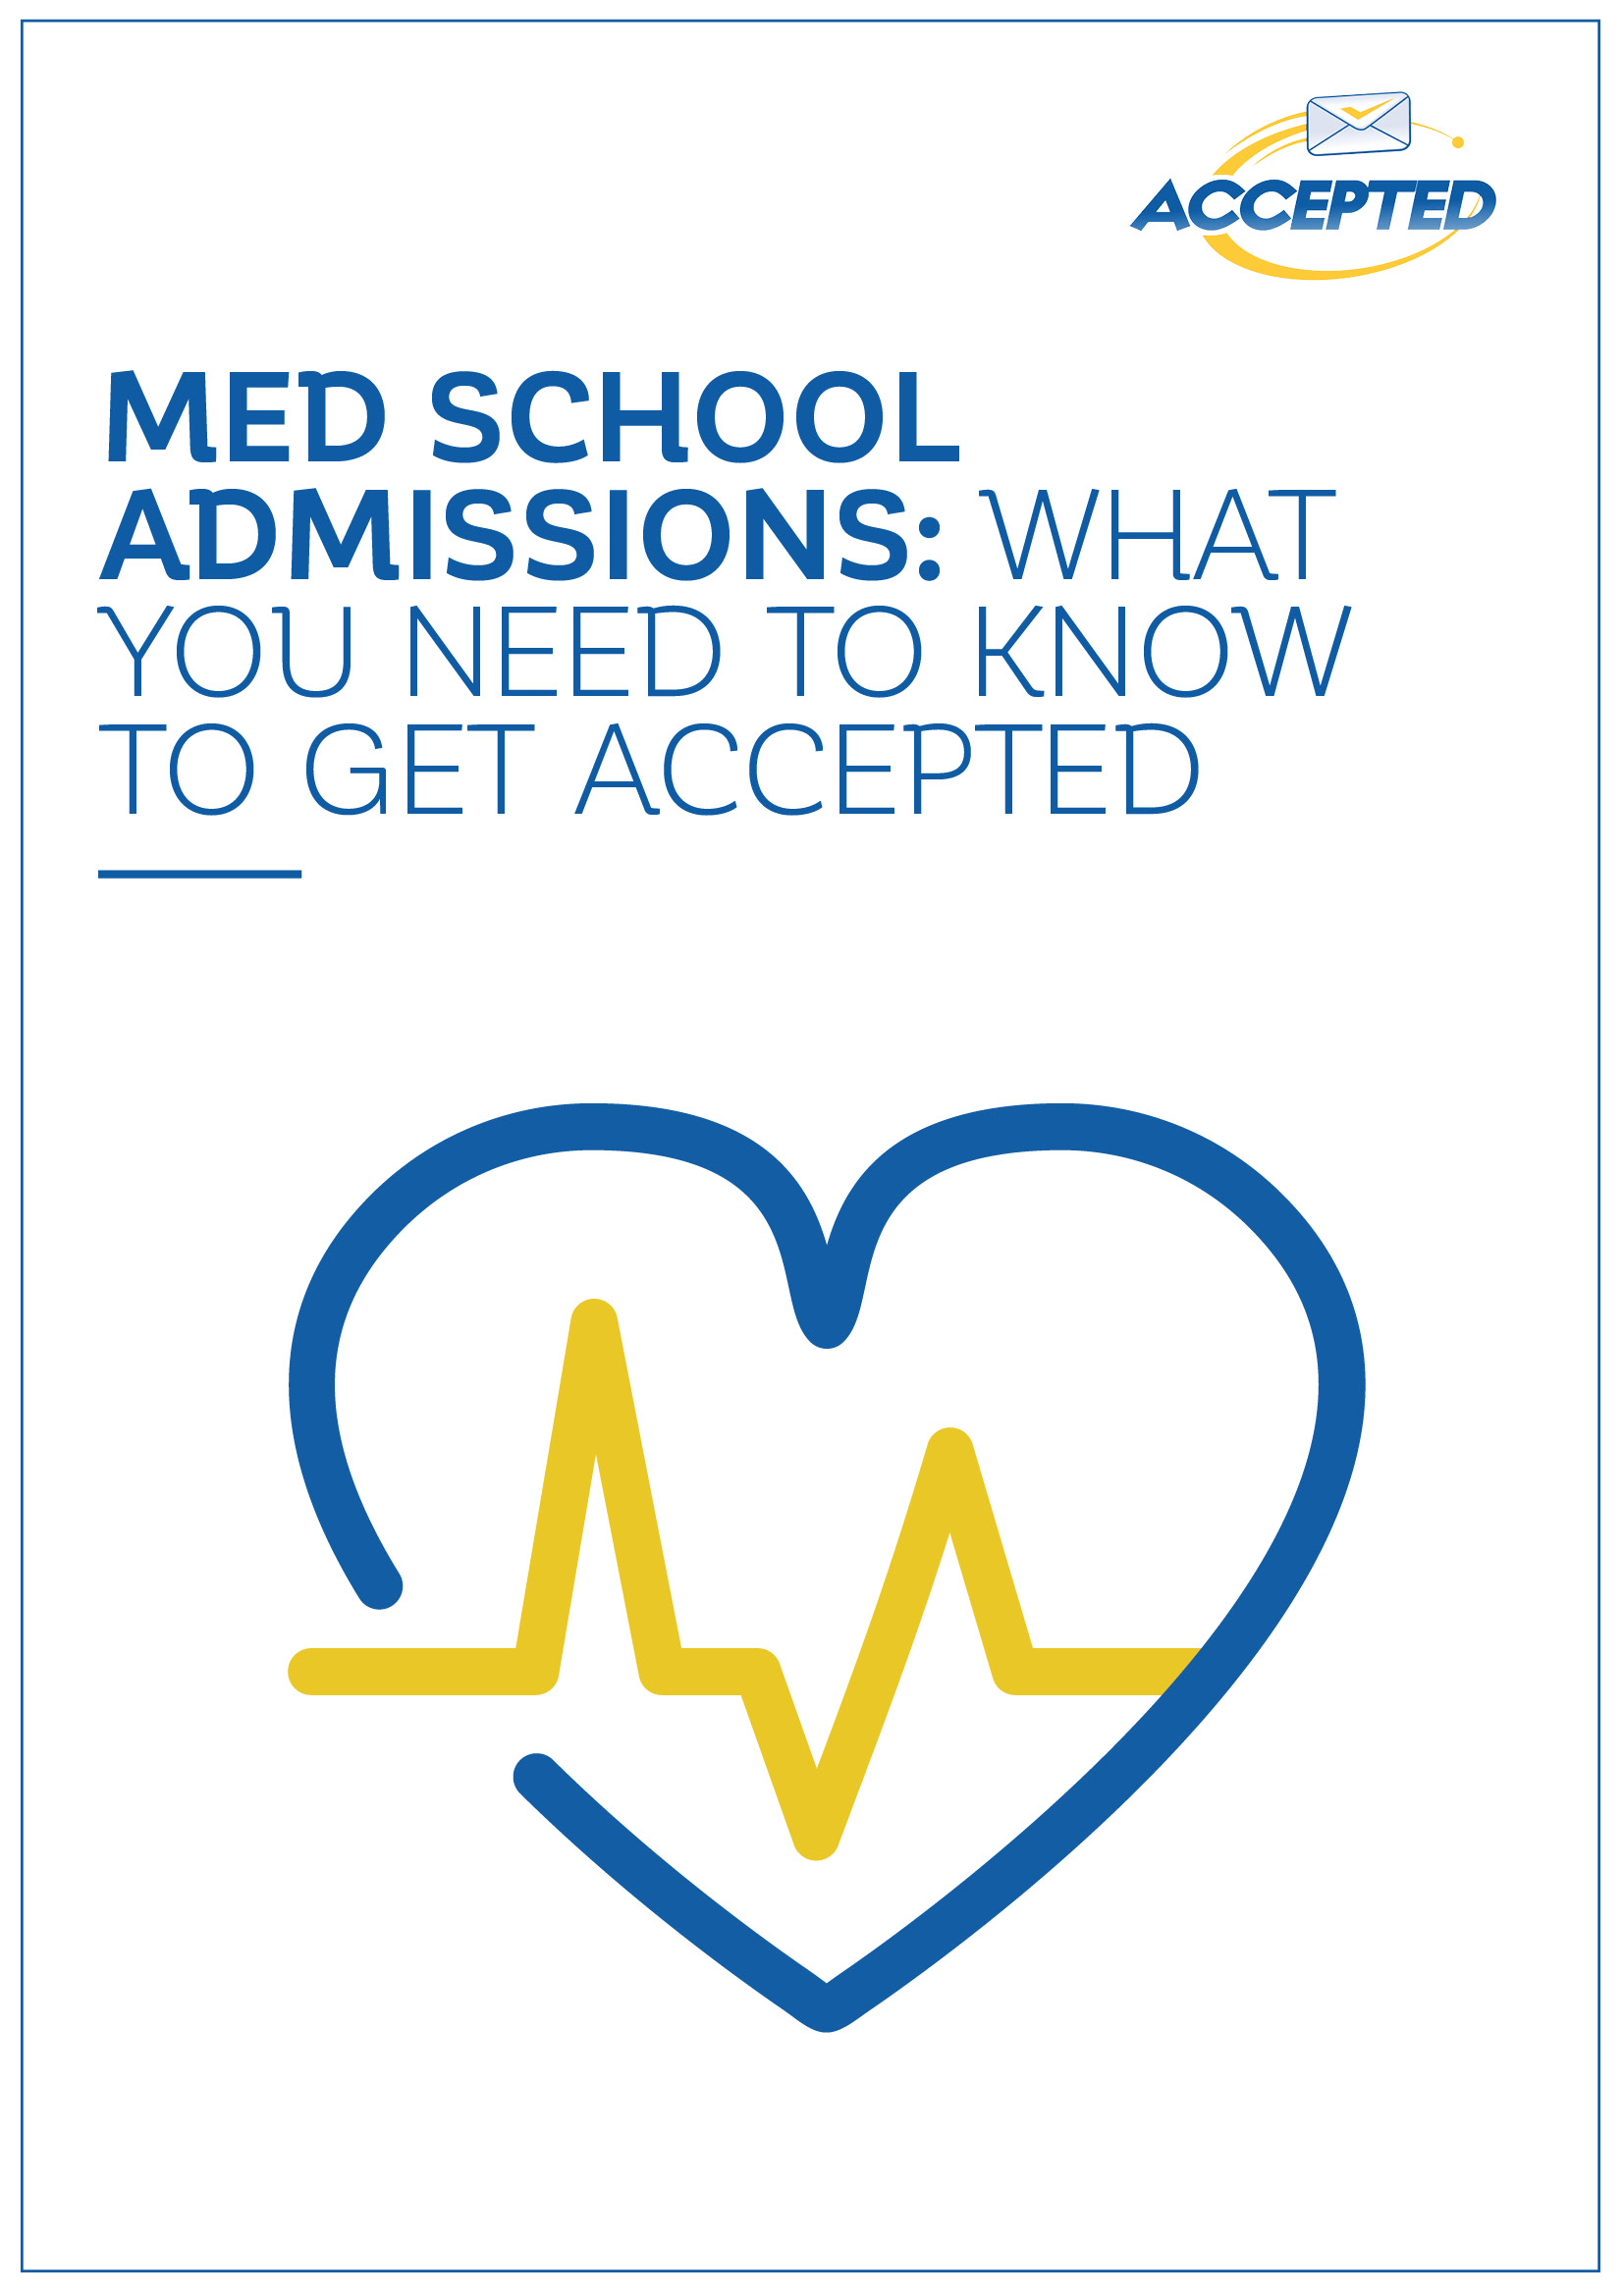 Med School Admissions: What You Need to Know to Get Accepted